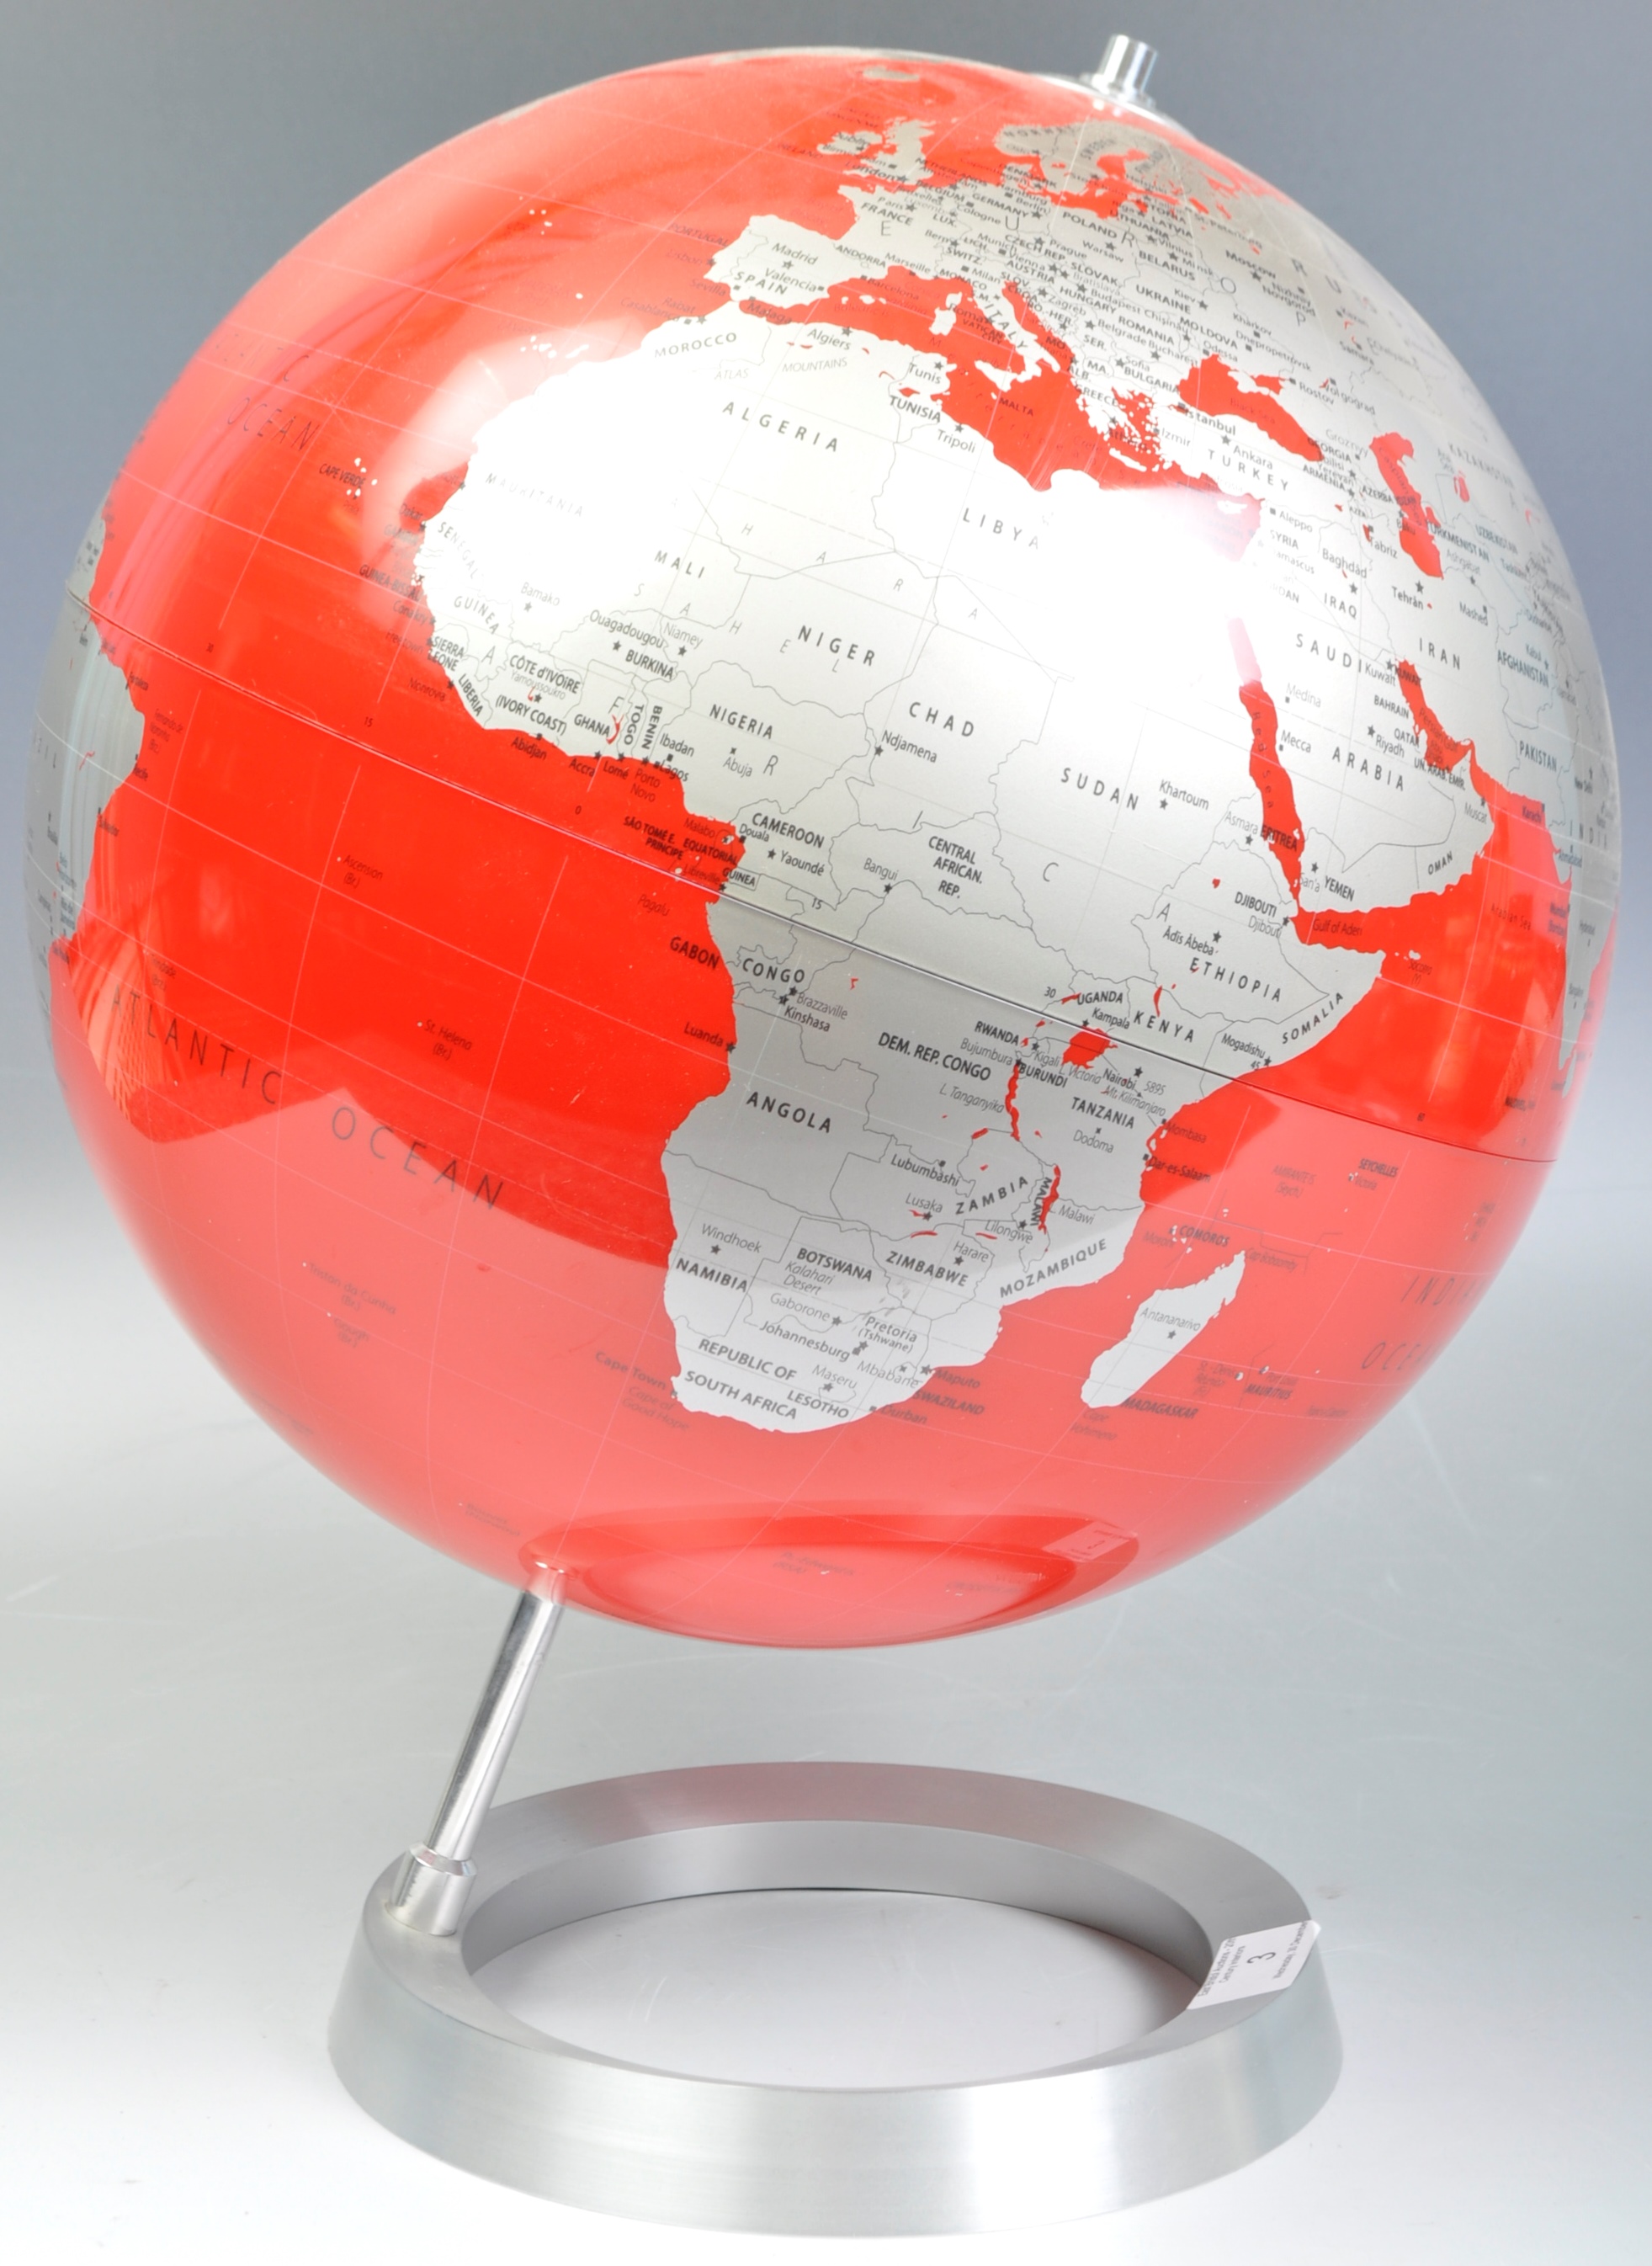 ATMOSPHERE GLOBE BY TOOLS OF DENMARK IN A RED AND SILVER COLOURWAY